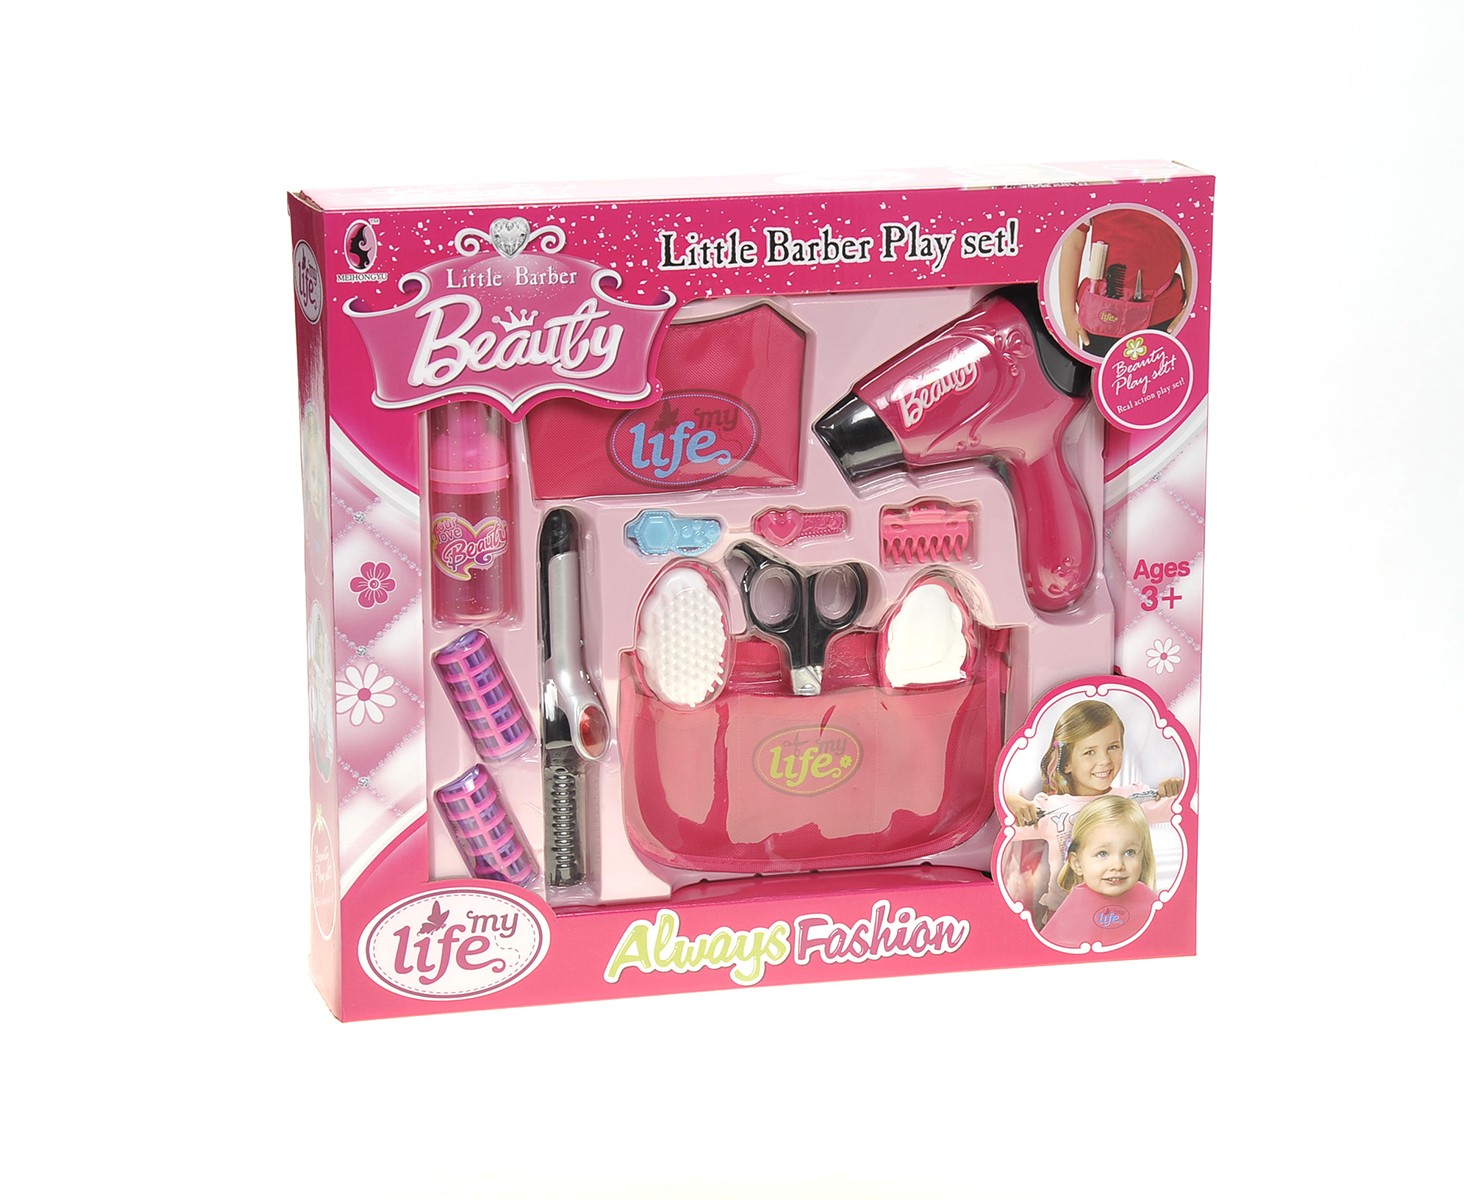 Beauty Salon Fashion Set With Hair Dryer, Curling Iron, Mirror, Scissors, Hair Brush, And More